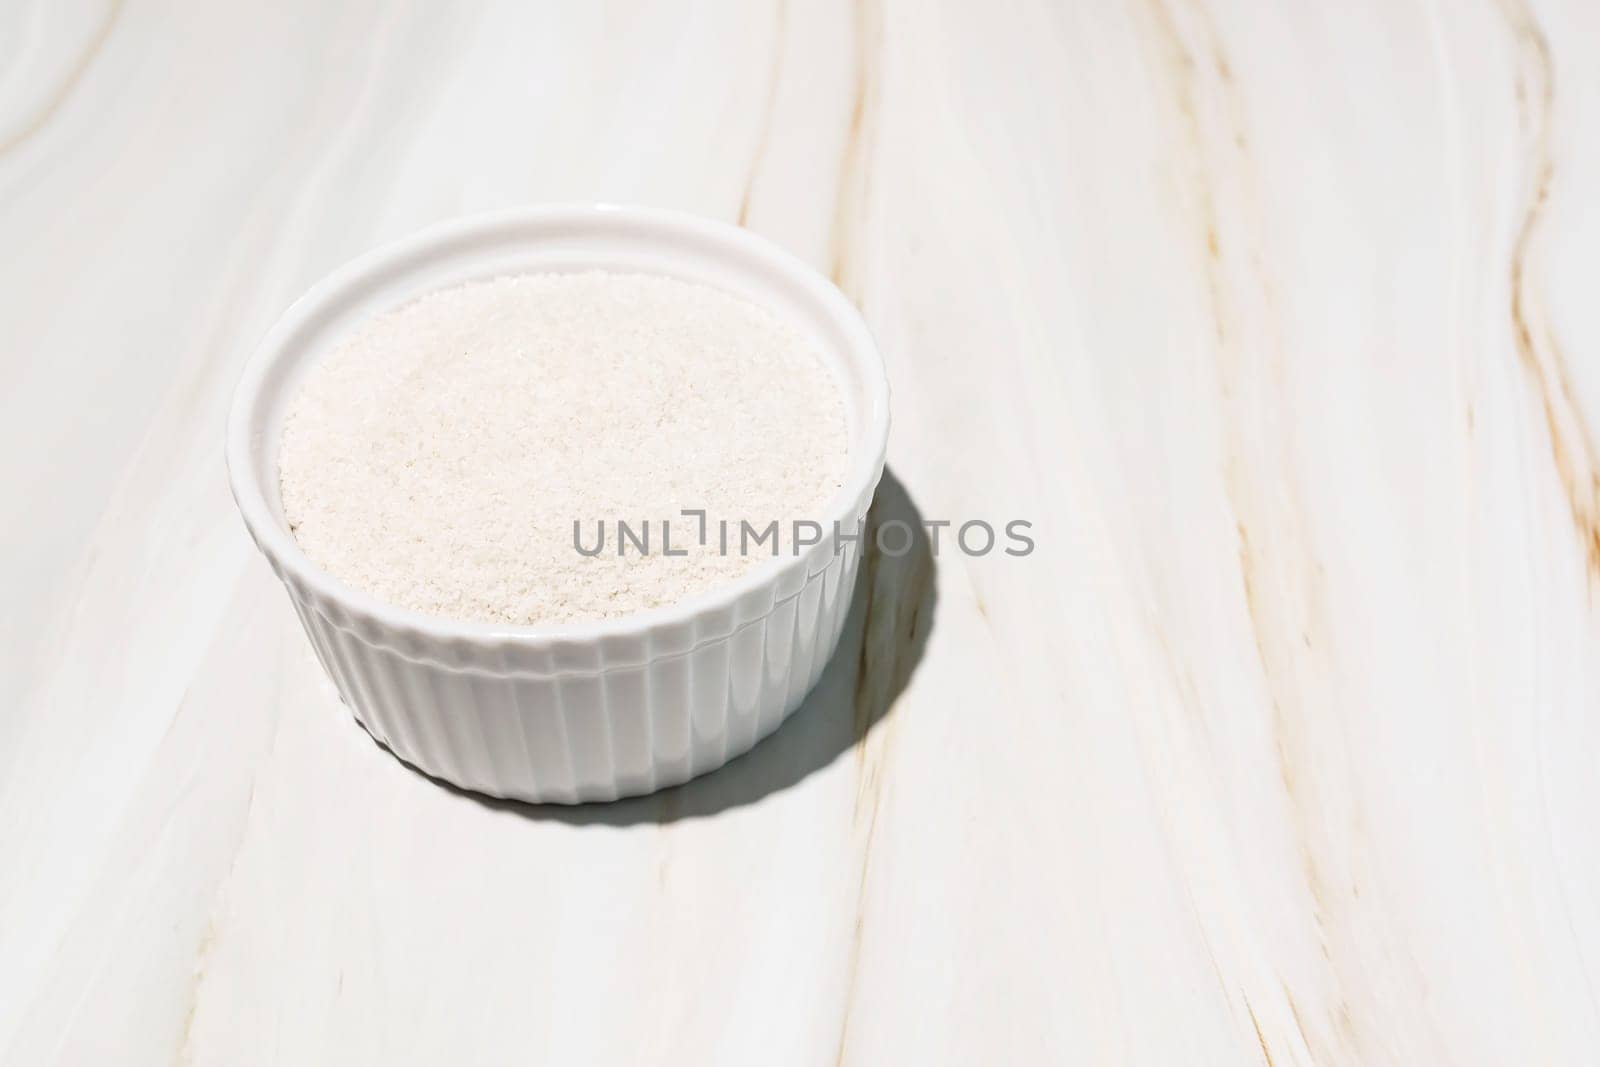 Celtic Gray Sea Salt In A White Ceramic Bowl On Granite Table, Copy Space. Horizontal Plane. Natural, Unrefined Salt Harvested From Brittany, France. Natural Minerals And Trace Elements, Superfood by netatsi